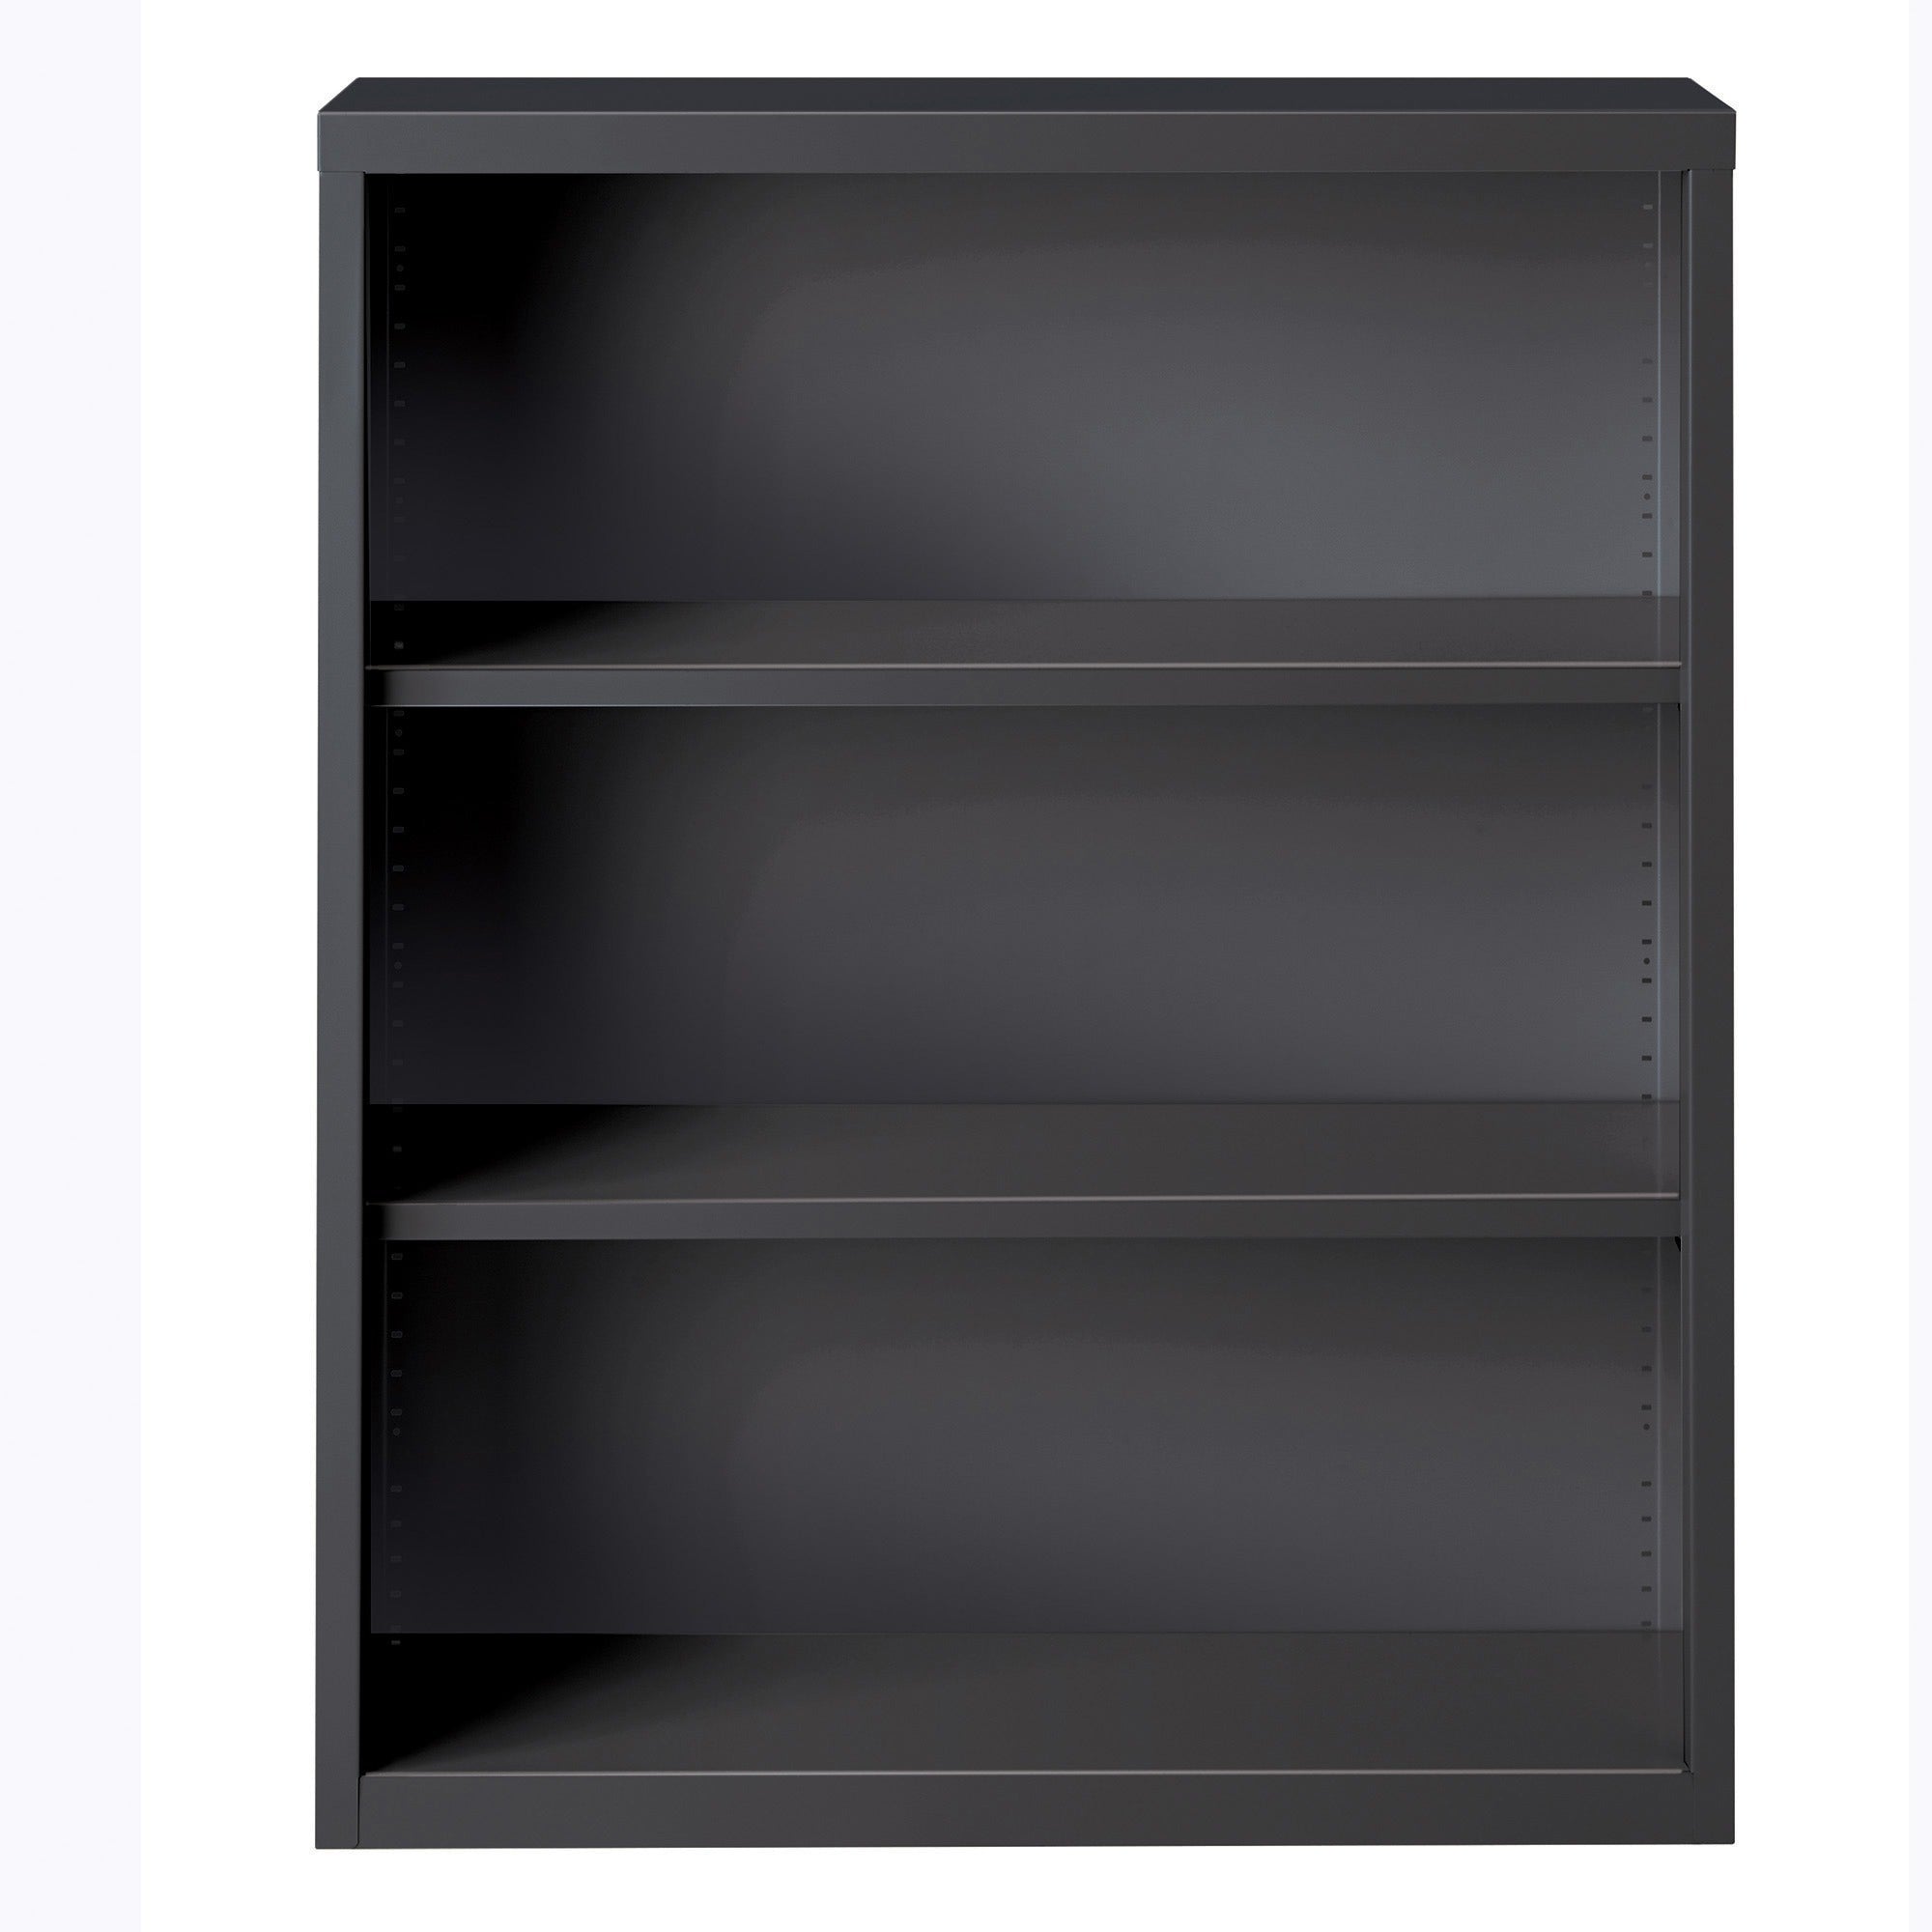 lorell-fortress-series-bookcase-345-x-1342-3-shelves-material-steel-finish-charcoal-powder-coated-adjustable-shelf-welded-durable_llr59692 - 2